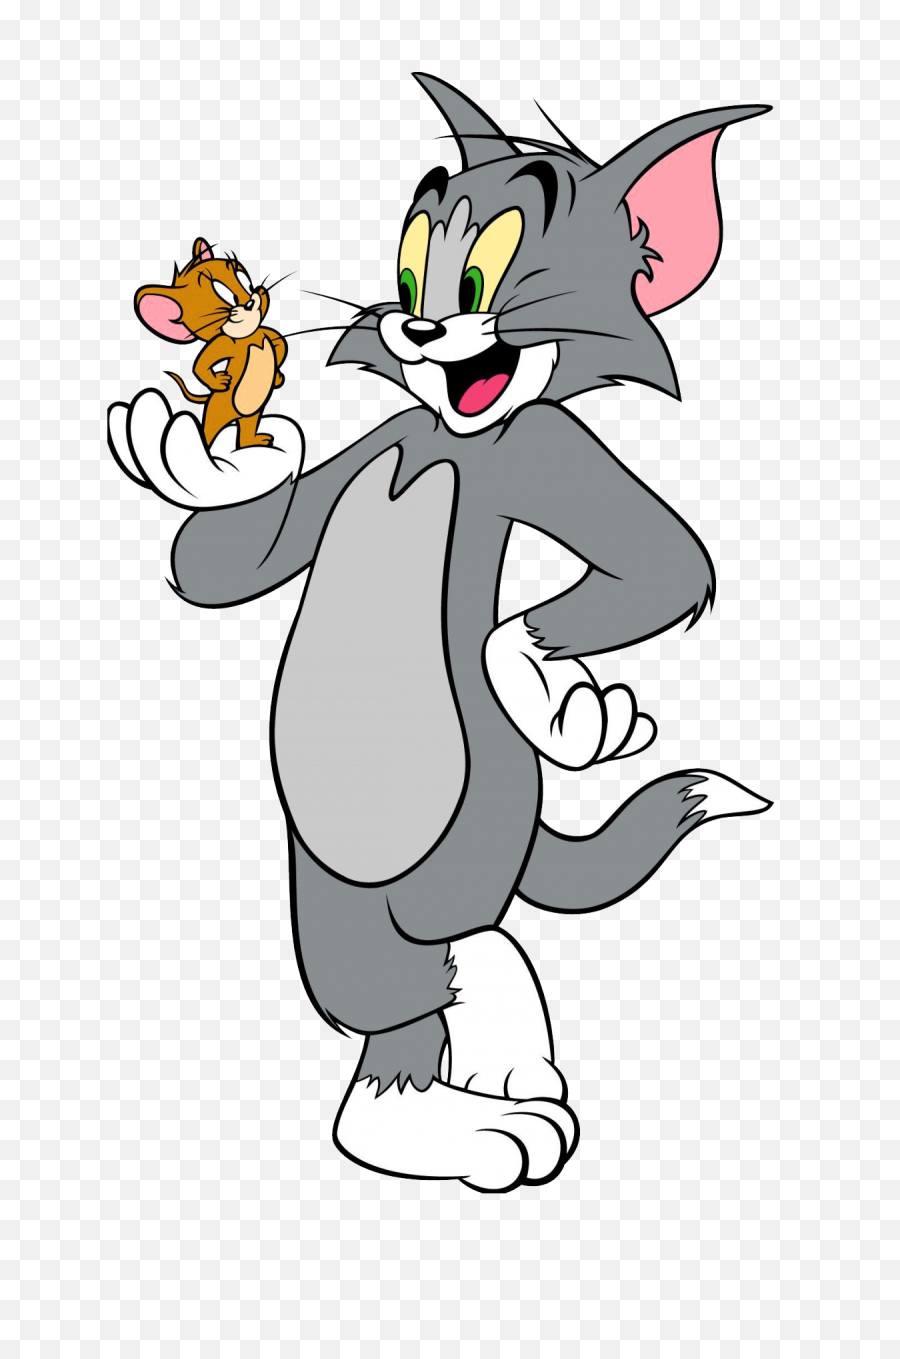 Tom And Jerry Cartoon Png Image - Purepng Free Transparent Love Tom And Jerry,Characters Png